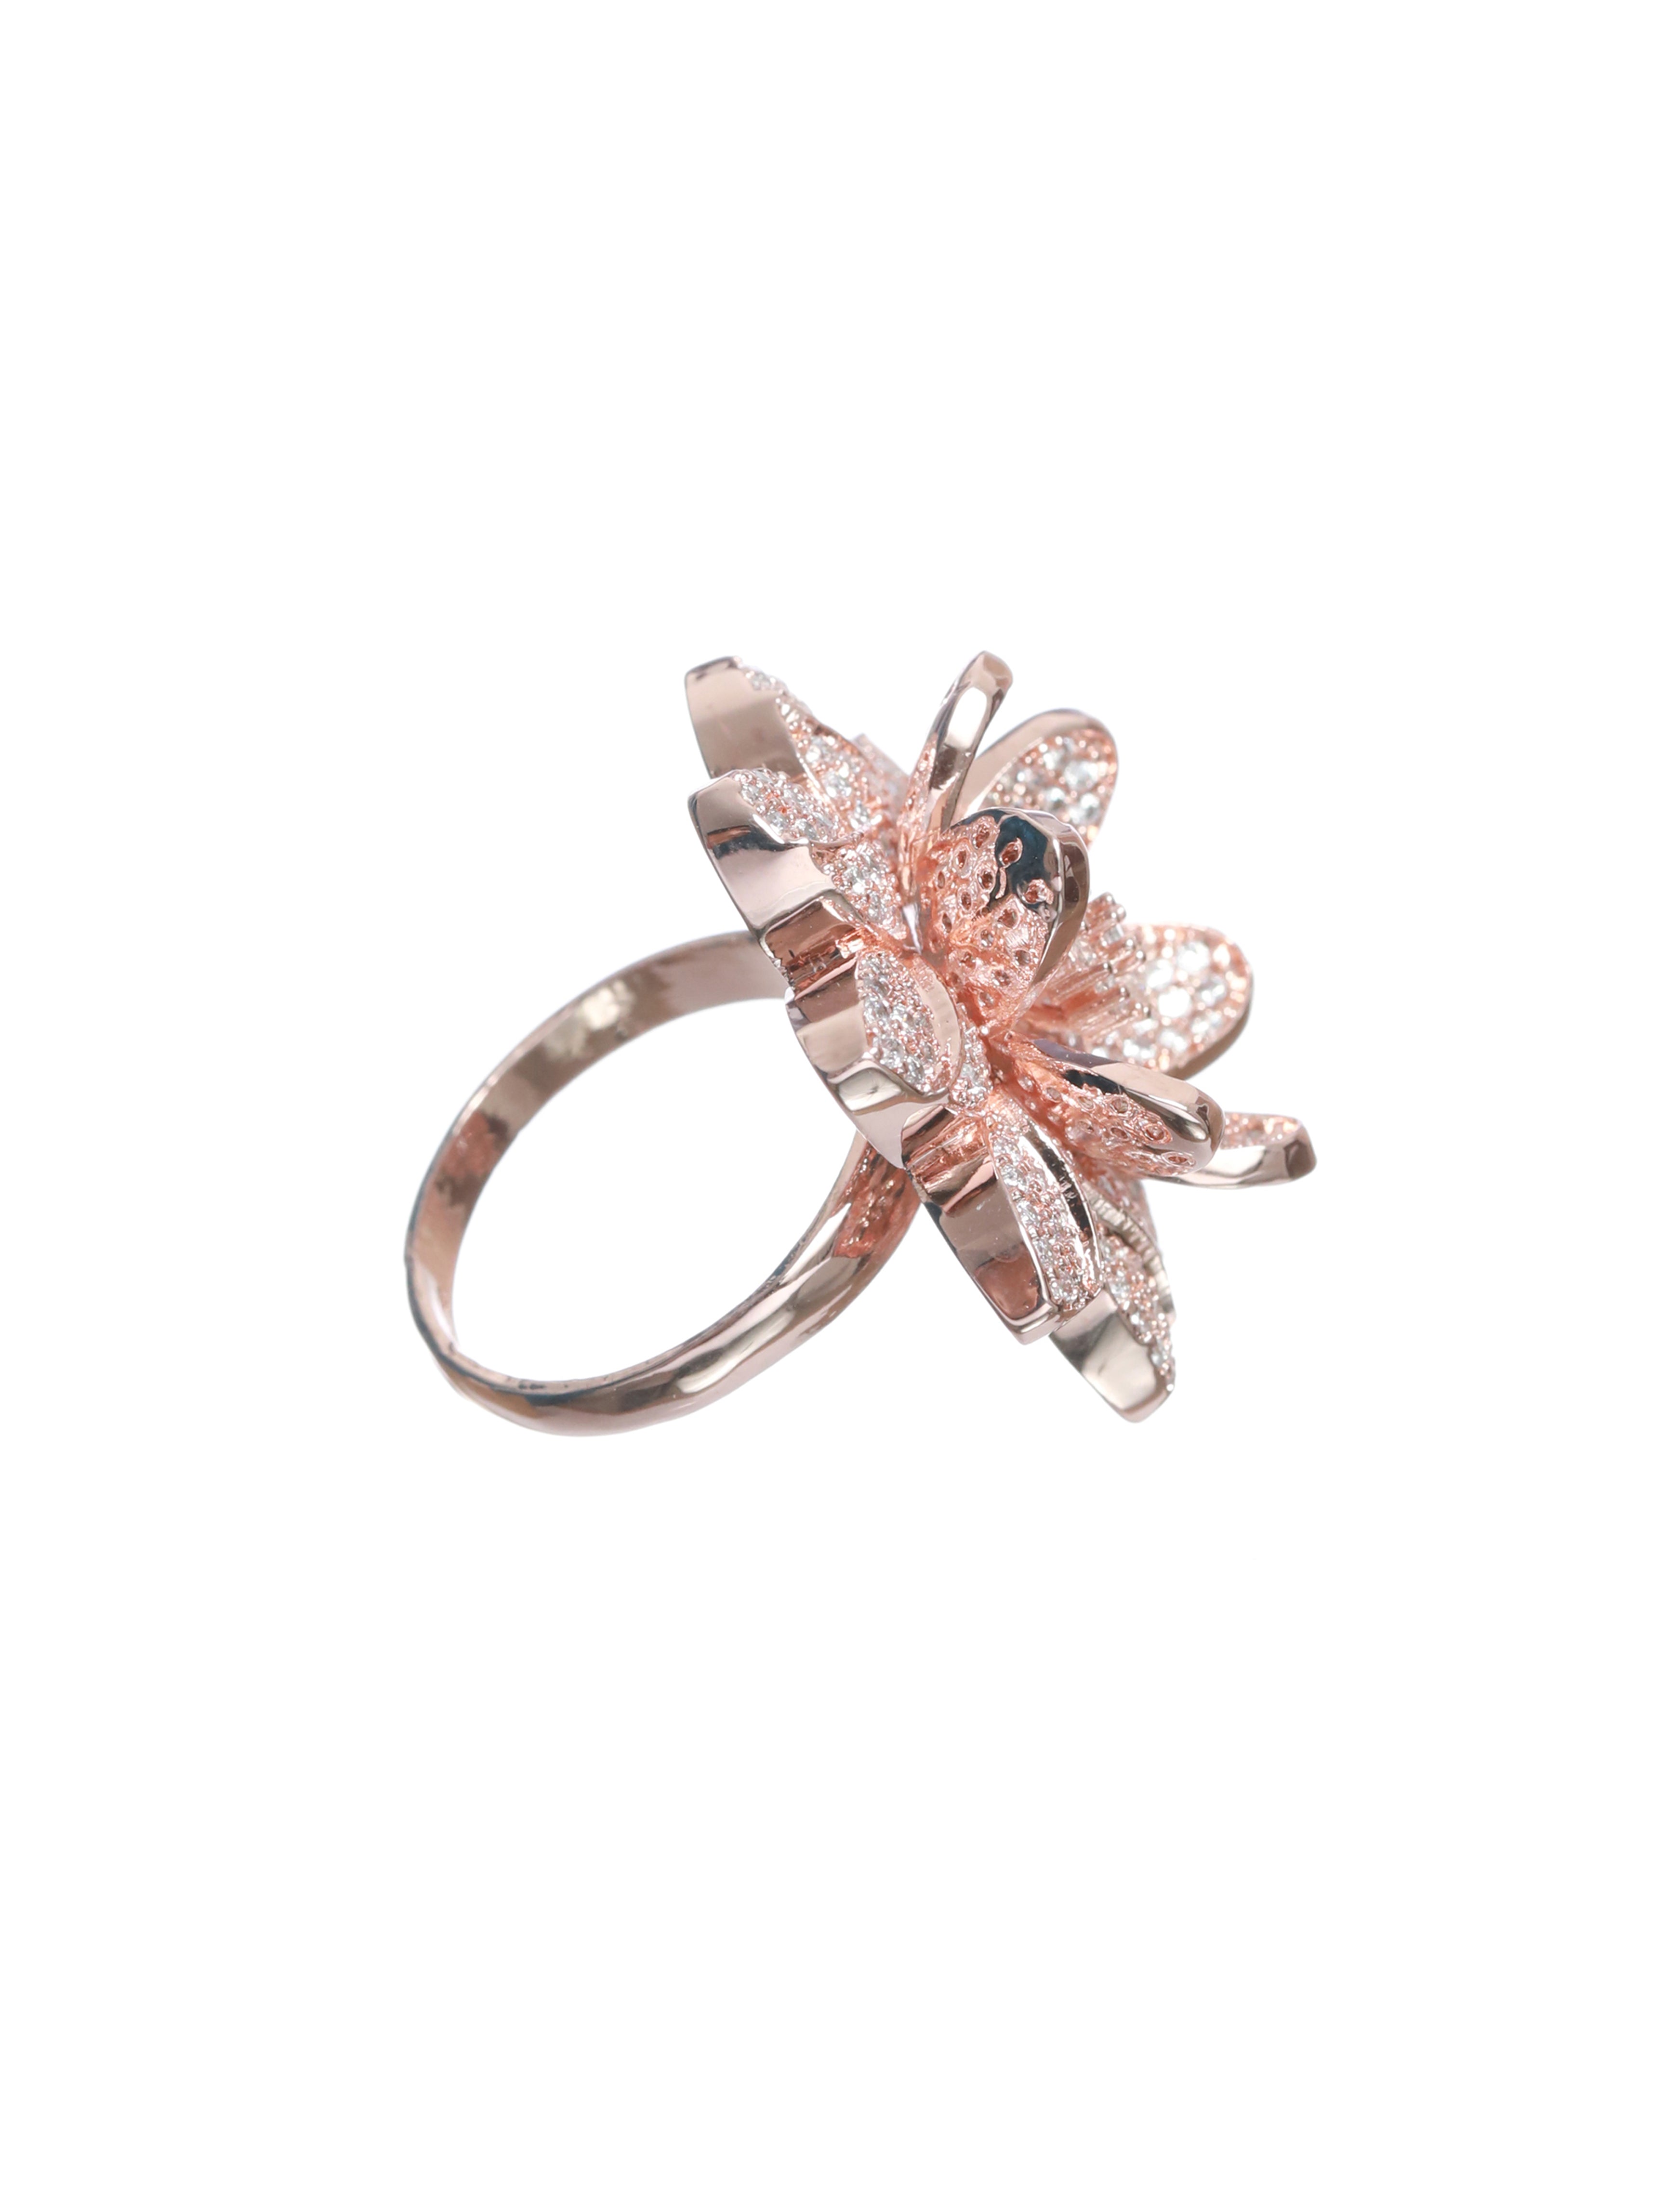 Rose Gold Plated Handcrafted American Diamond Studded Adjustable Floral Finger Ring - Jazzandsizzle